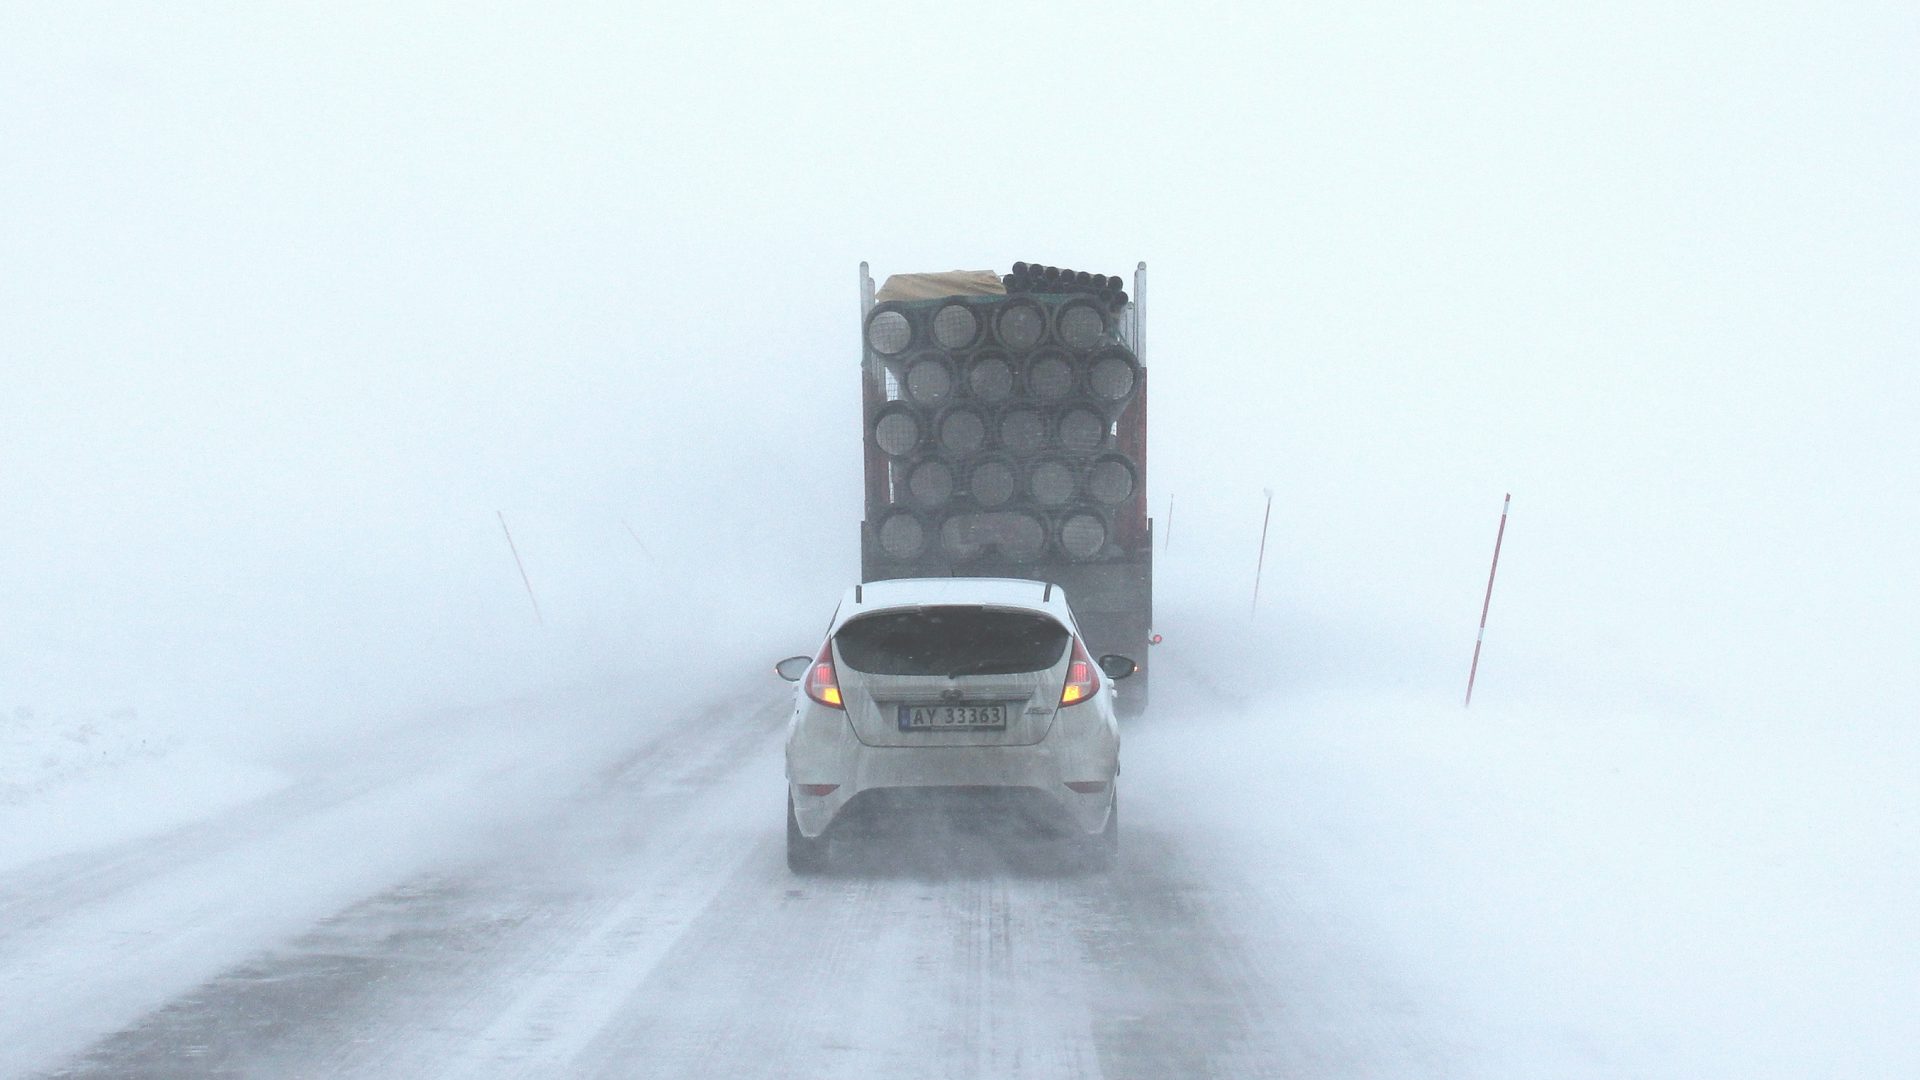 car behind the truck in winter